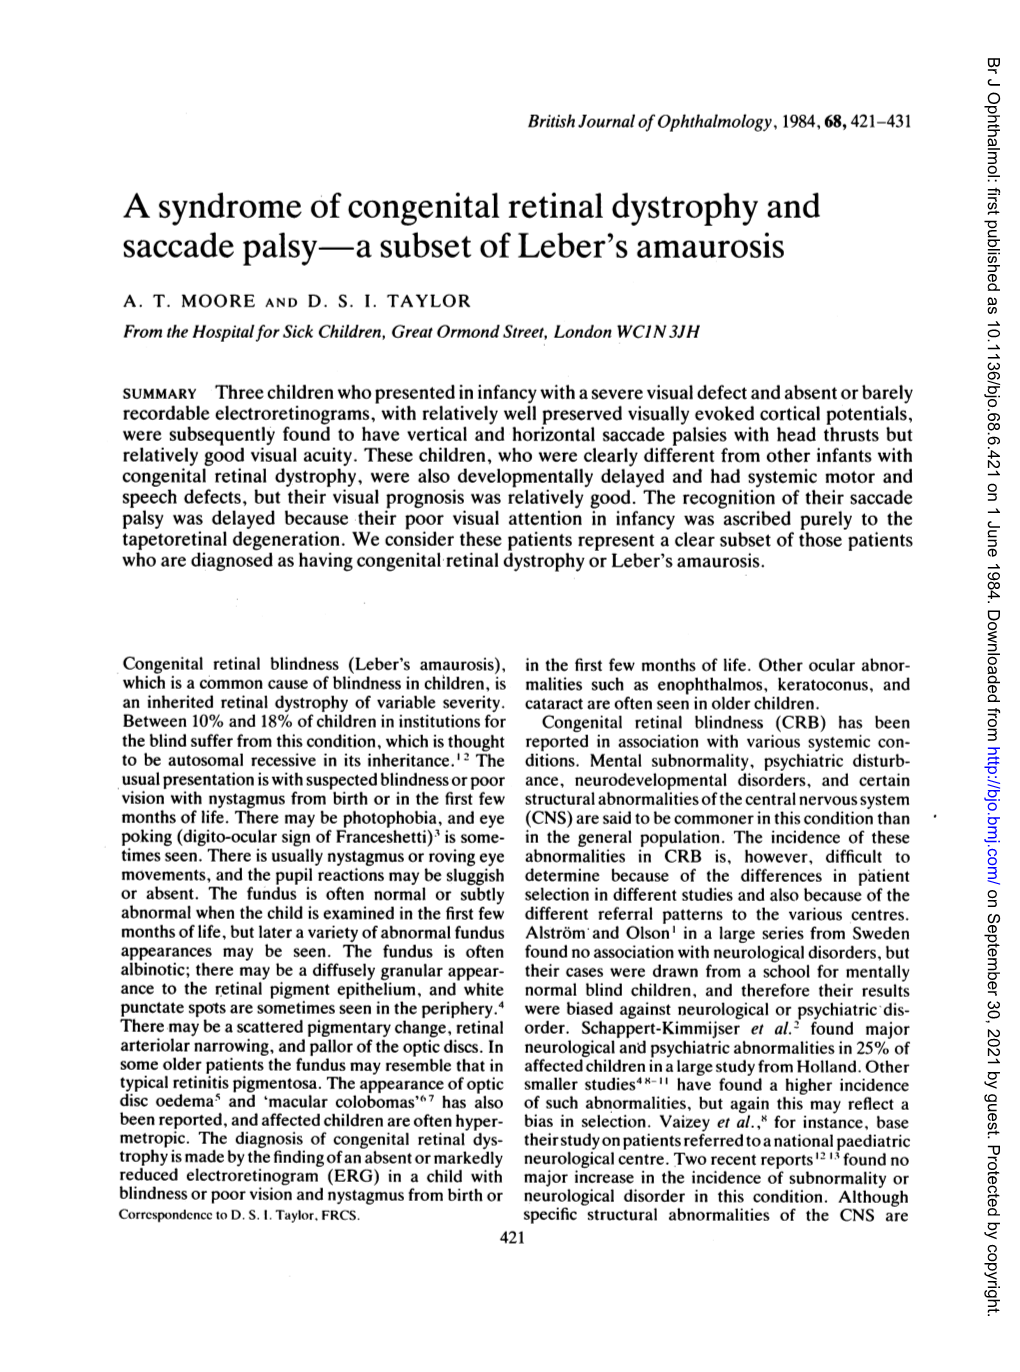 A Syndrome of Congenital Retinal Dystrophy and Saccade Palsy-A Subset of Leber's Amaurosis